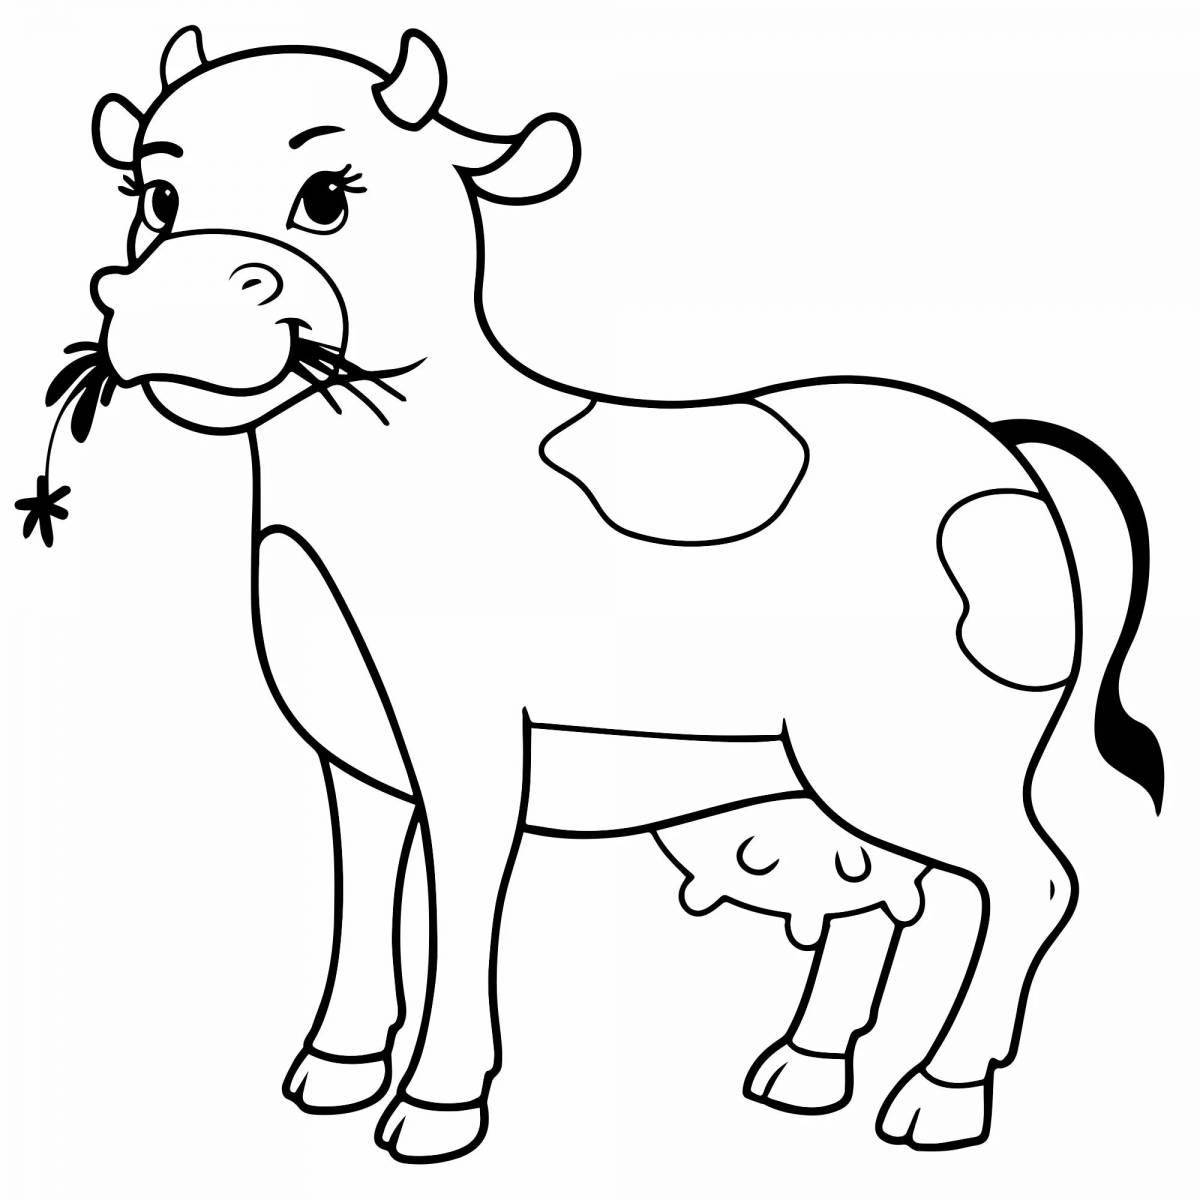 Cow for kids #14